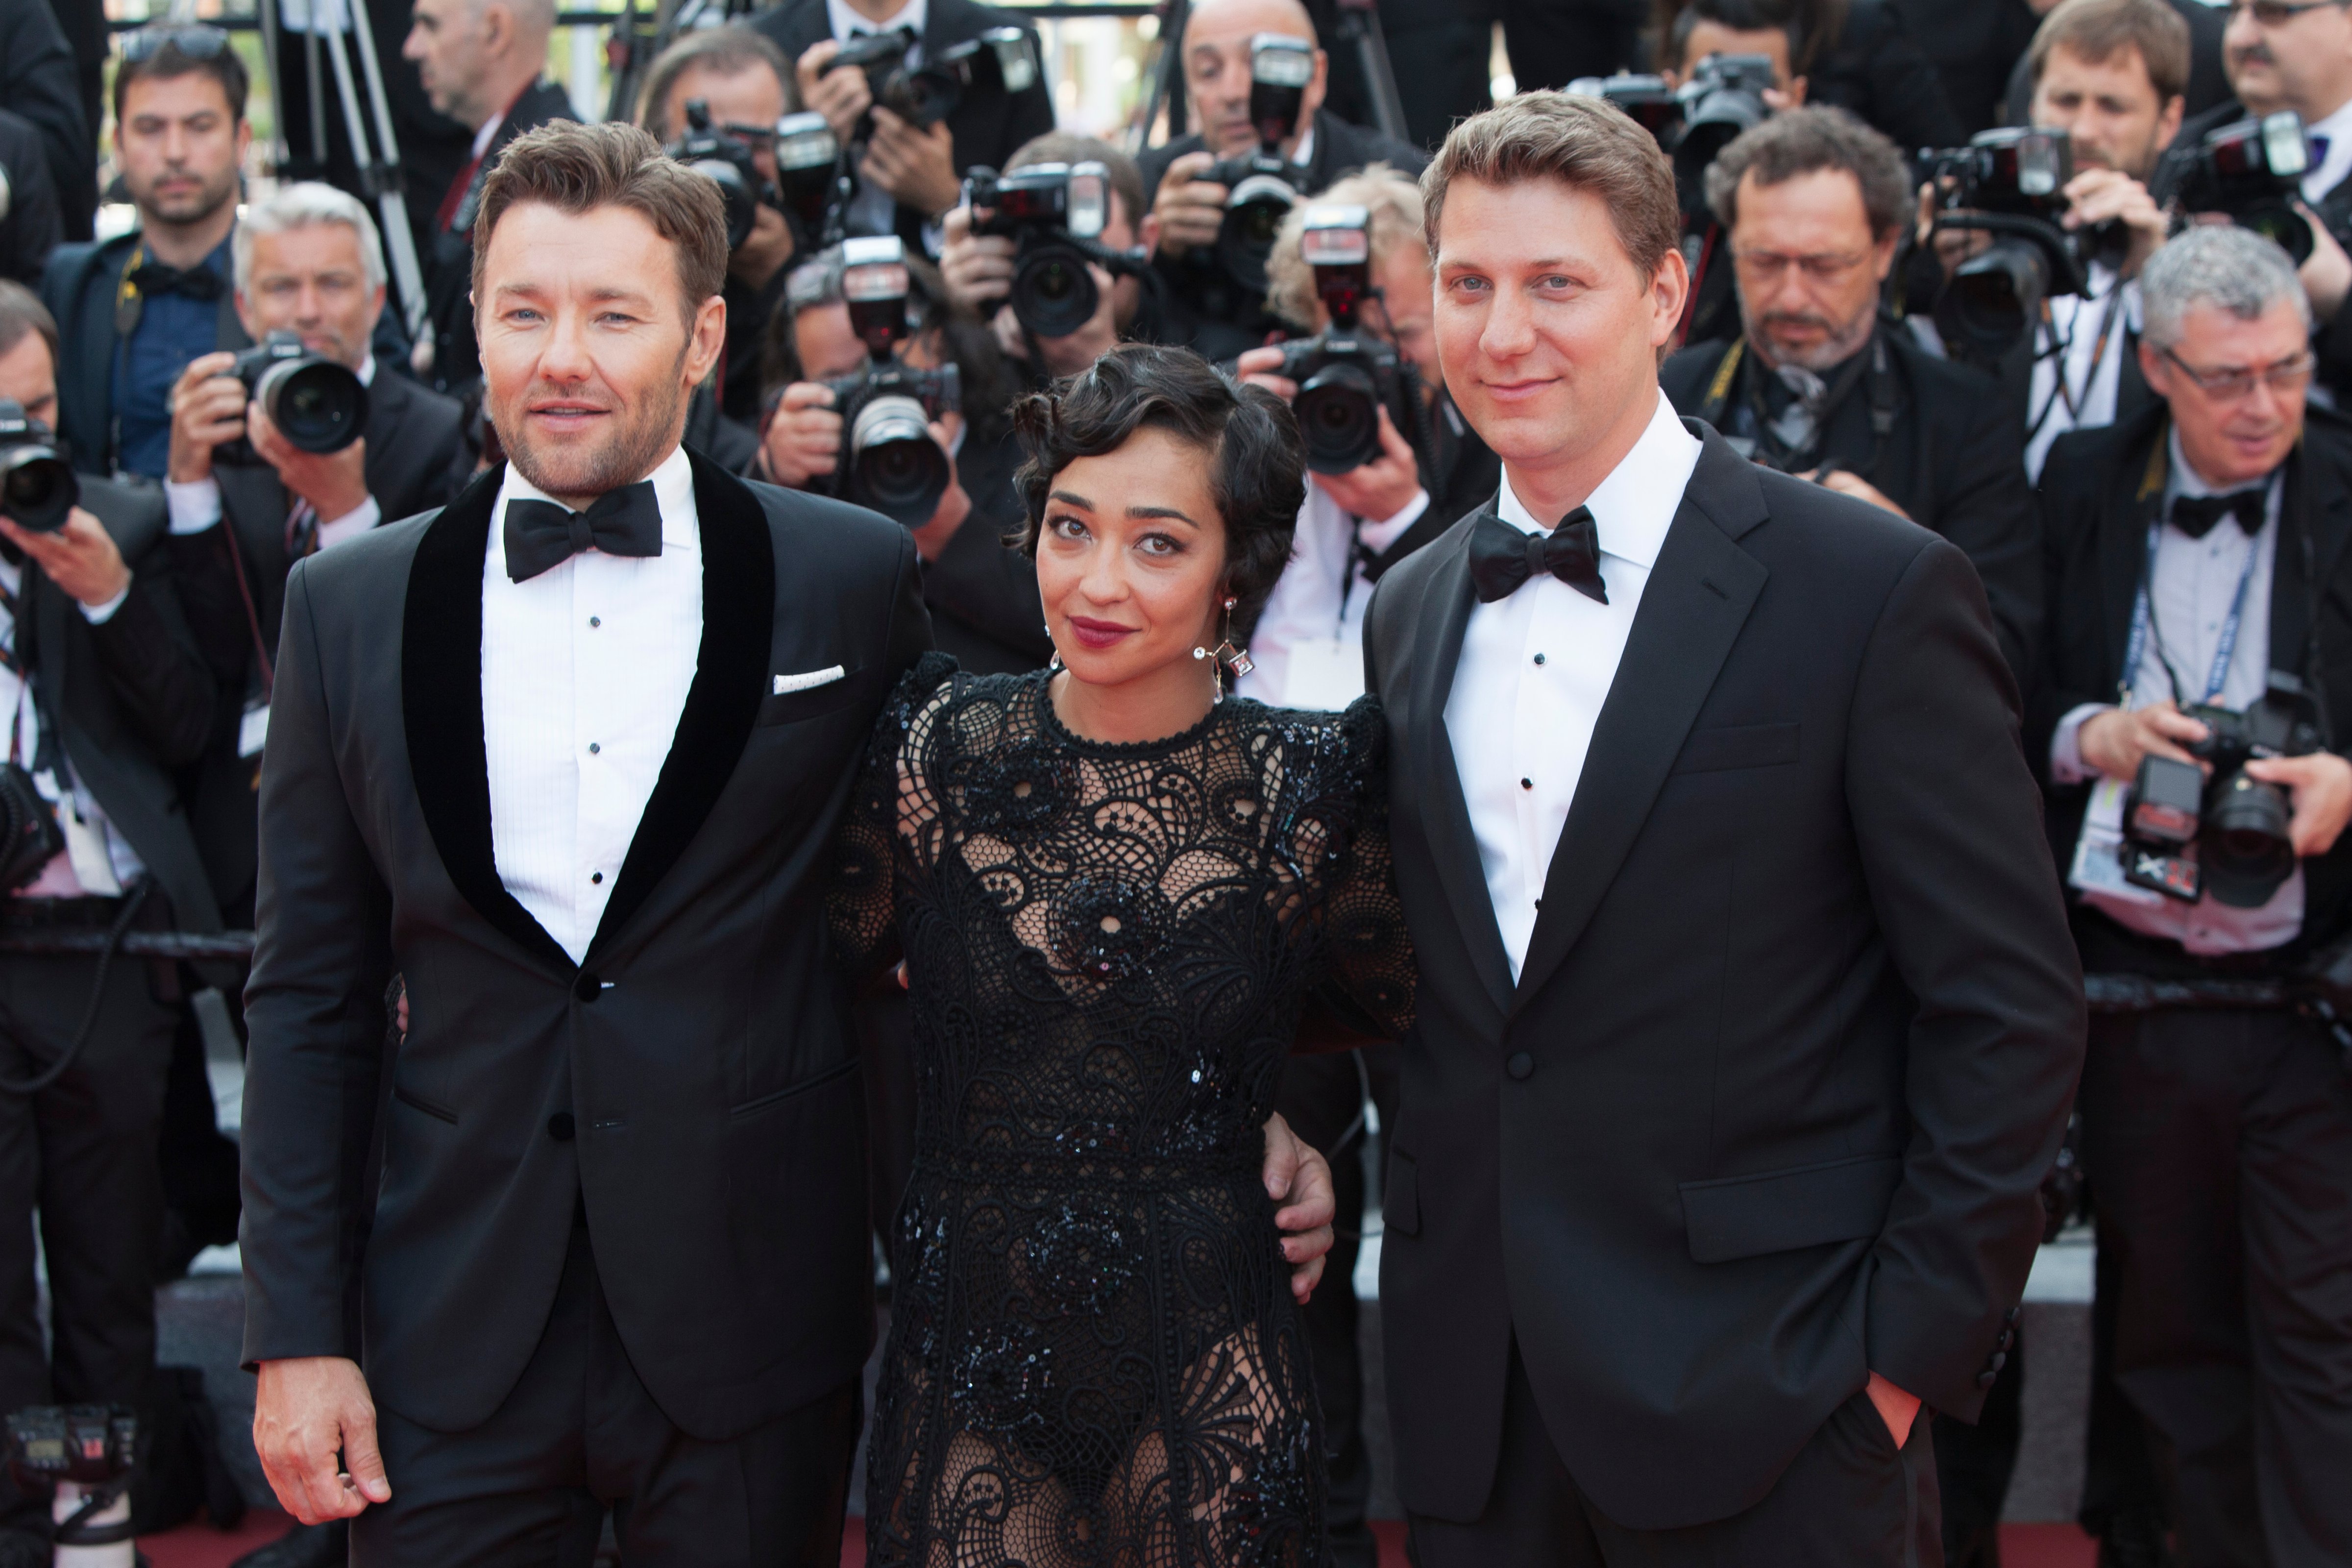 From left: Joel Edgerton, Ruth Negga, and director Jeff Nichols during the 69th annual Cannes Film Festival at the Palais des Festivals on May 16, 2016 in Cannes, France. (Laurent Koffel—Getty Images)